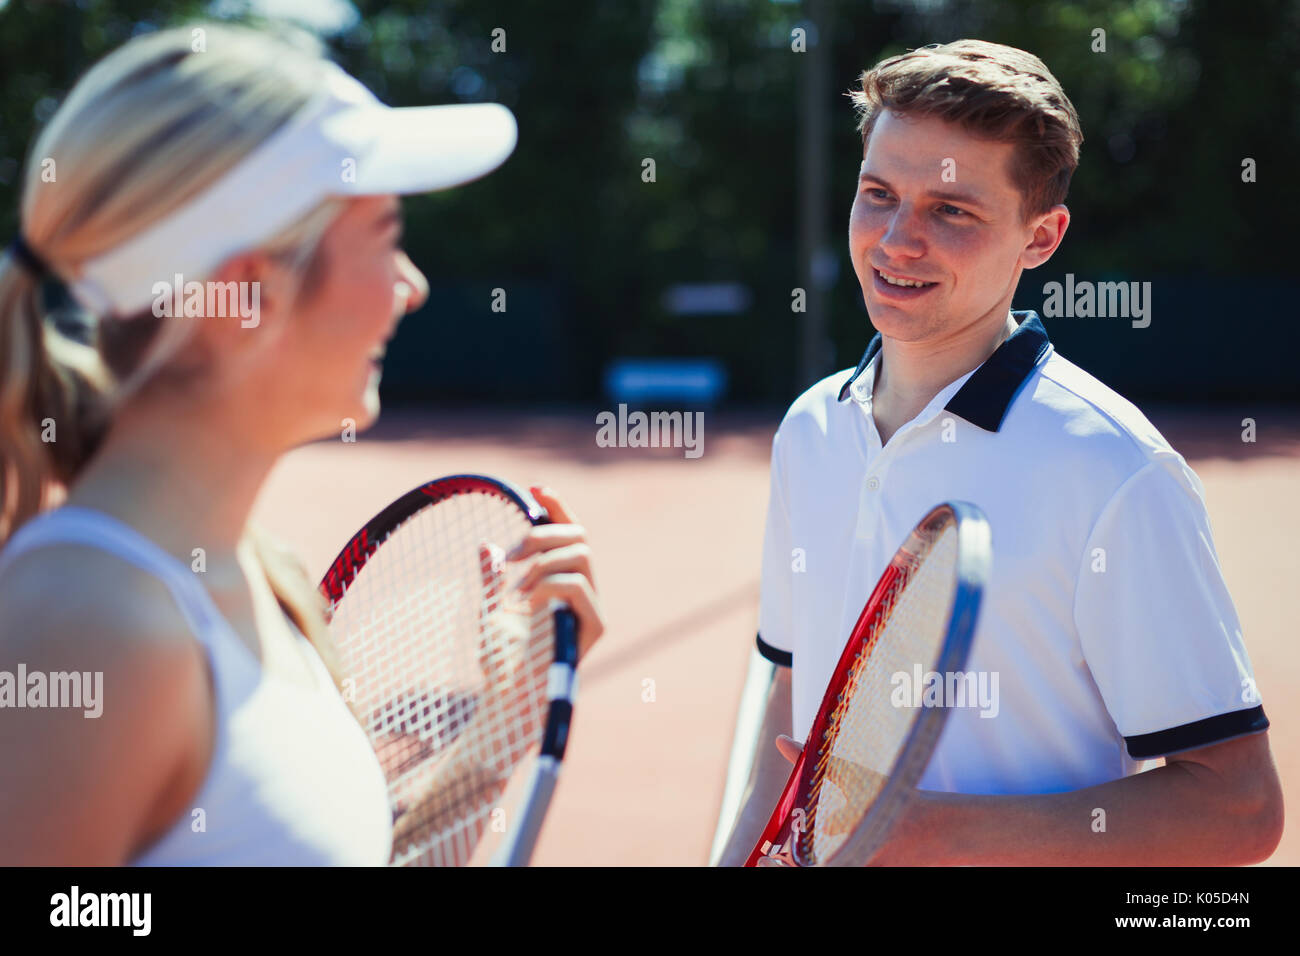 Male and female tennis players talking, holding tennis rackets Stock Photo